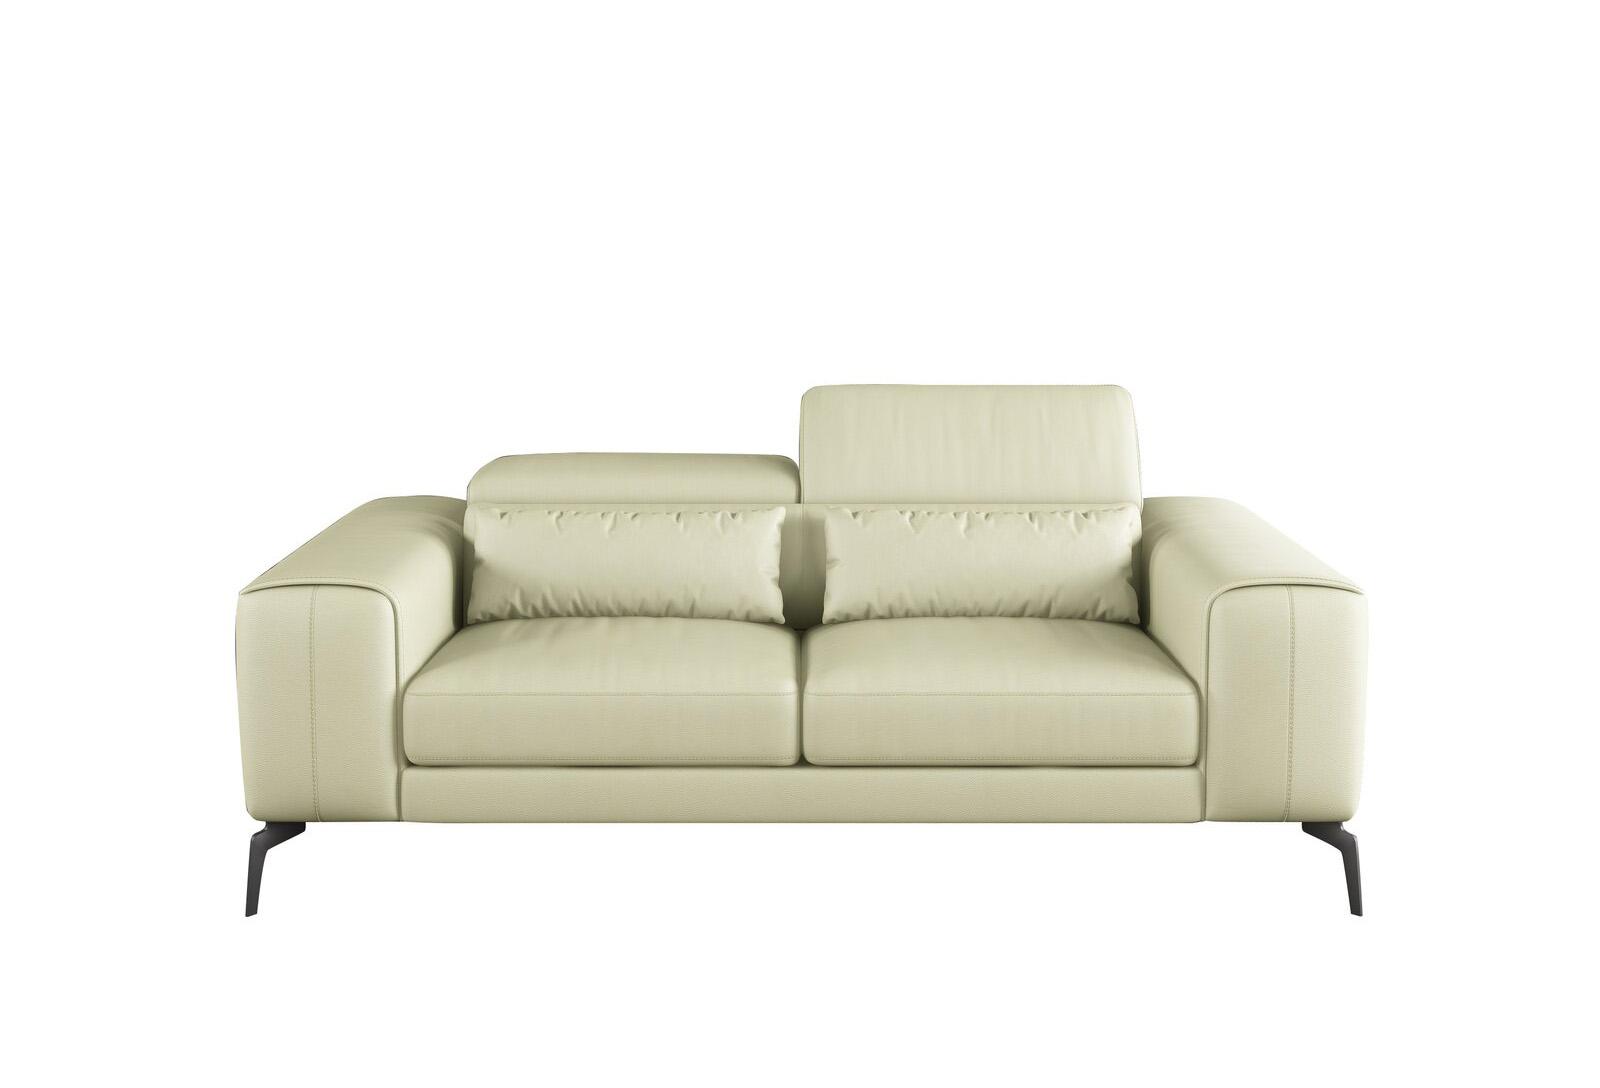 Contemporary, Modern Loveseat CAVOUR EF-12552-L in Off-White Leather